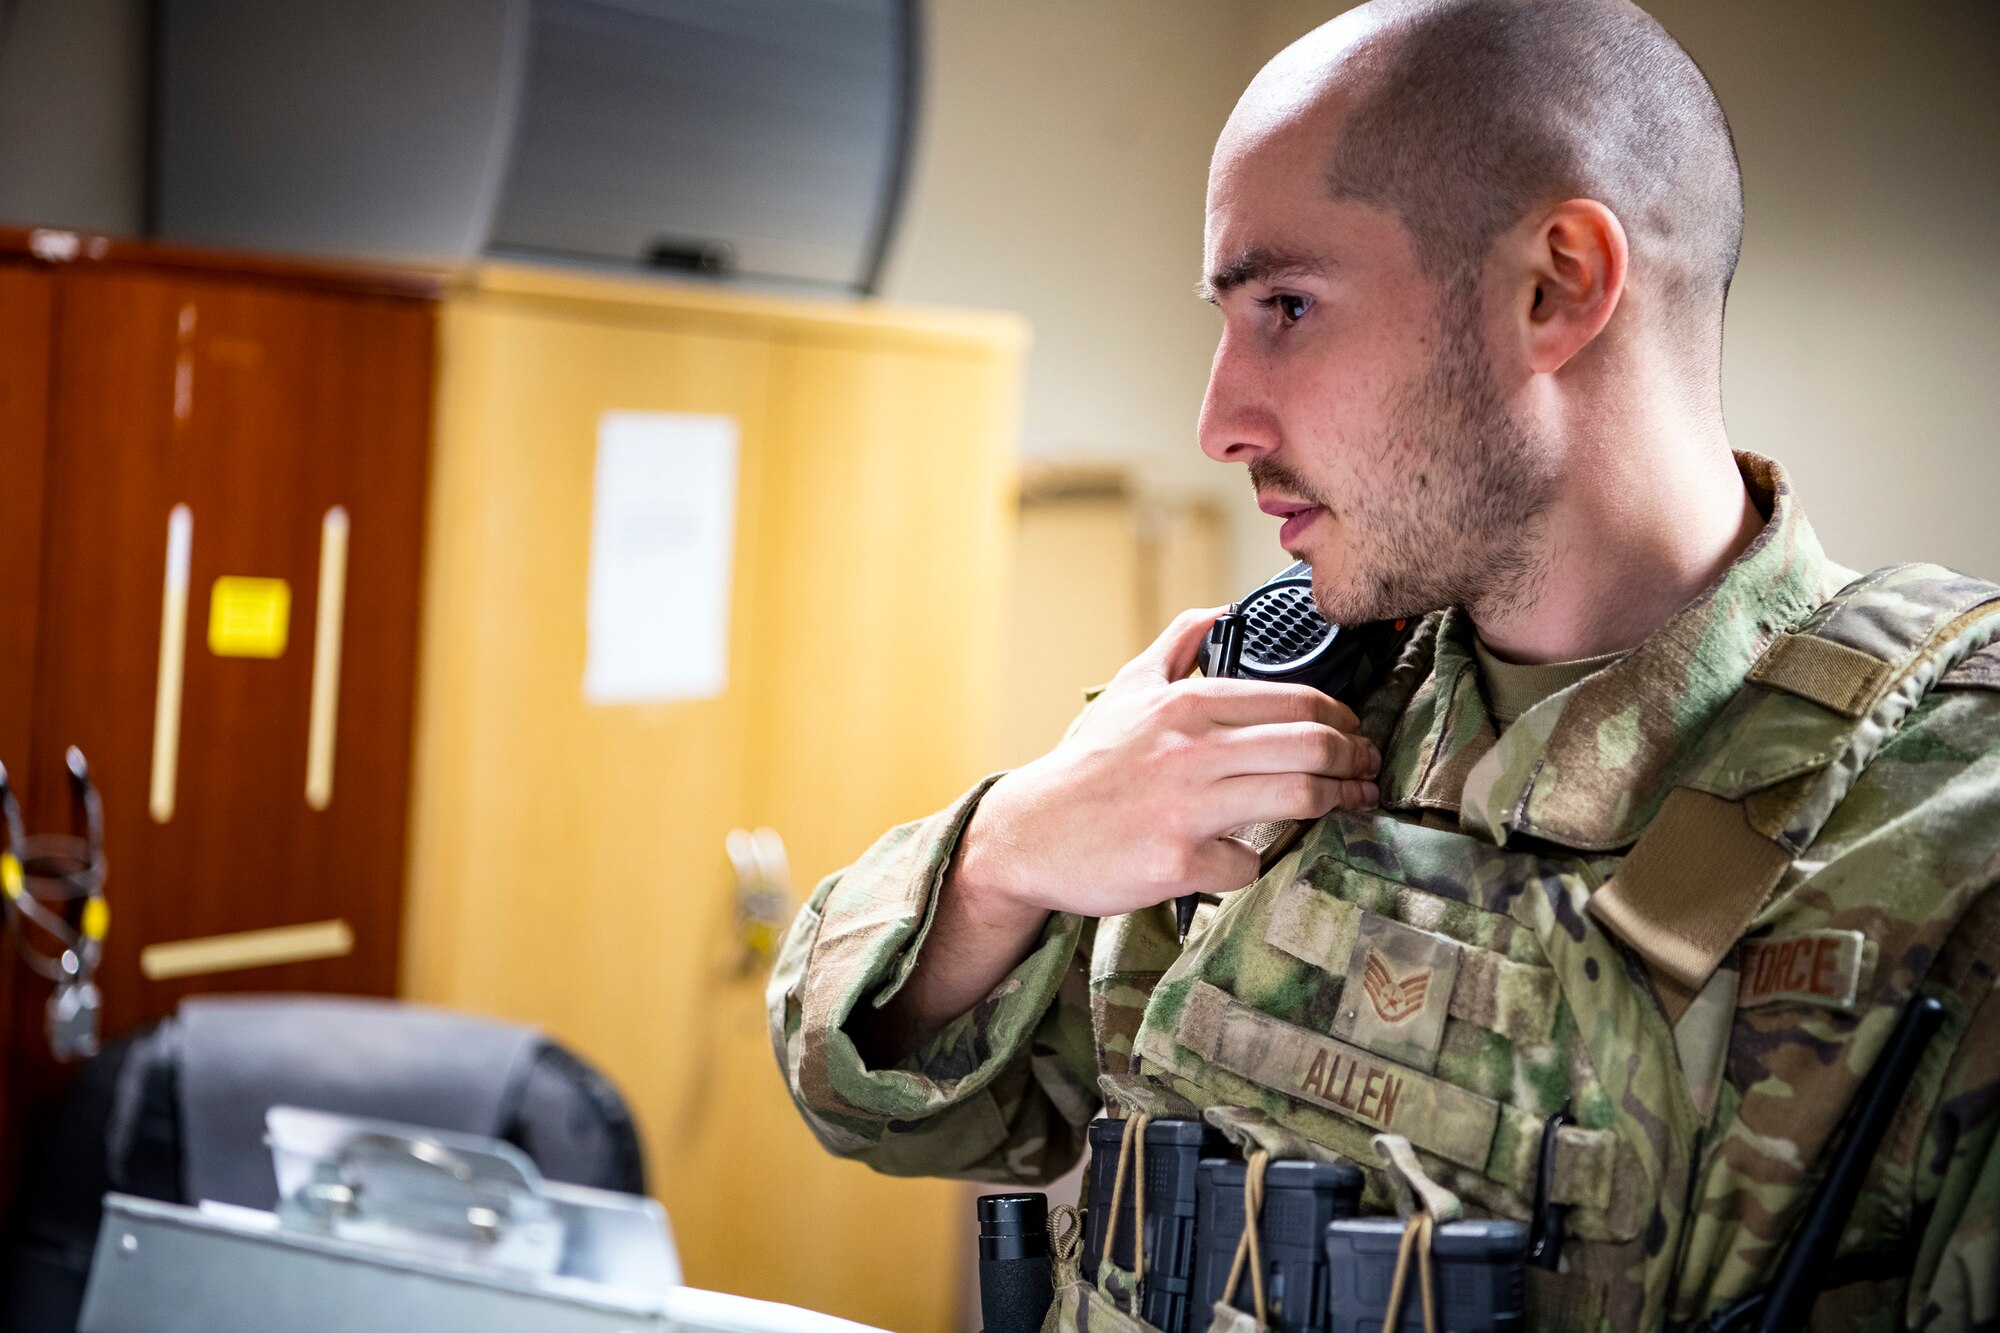 U.S. Air Force Staff Sgt. Elijah Allen, 423d Security Forces Squadron flight sergeant, speaks into his radio during a field training exercise at RAF Molesworth England, April 27, 2022. The exercise was designed to evaluate the strengths and weaknesses of 423d SFS members' response to various scenarios including domestic disturbances, drunk driving and other base security incidents. (U.S. Air Force photo by Staff Sgt. Eugene Oliver)